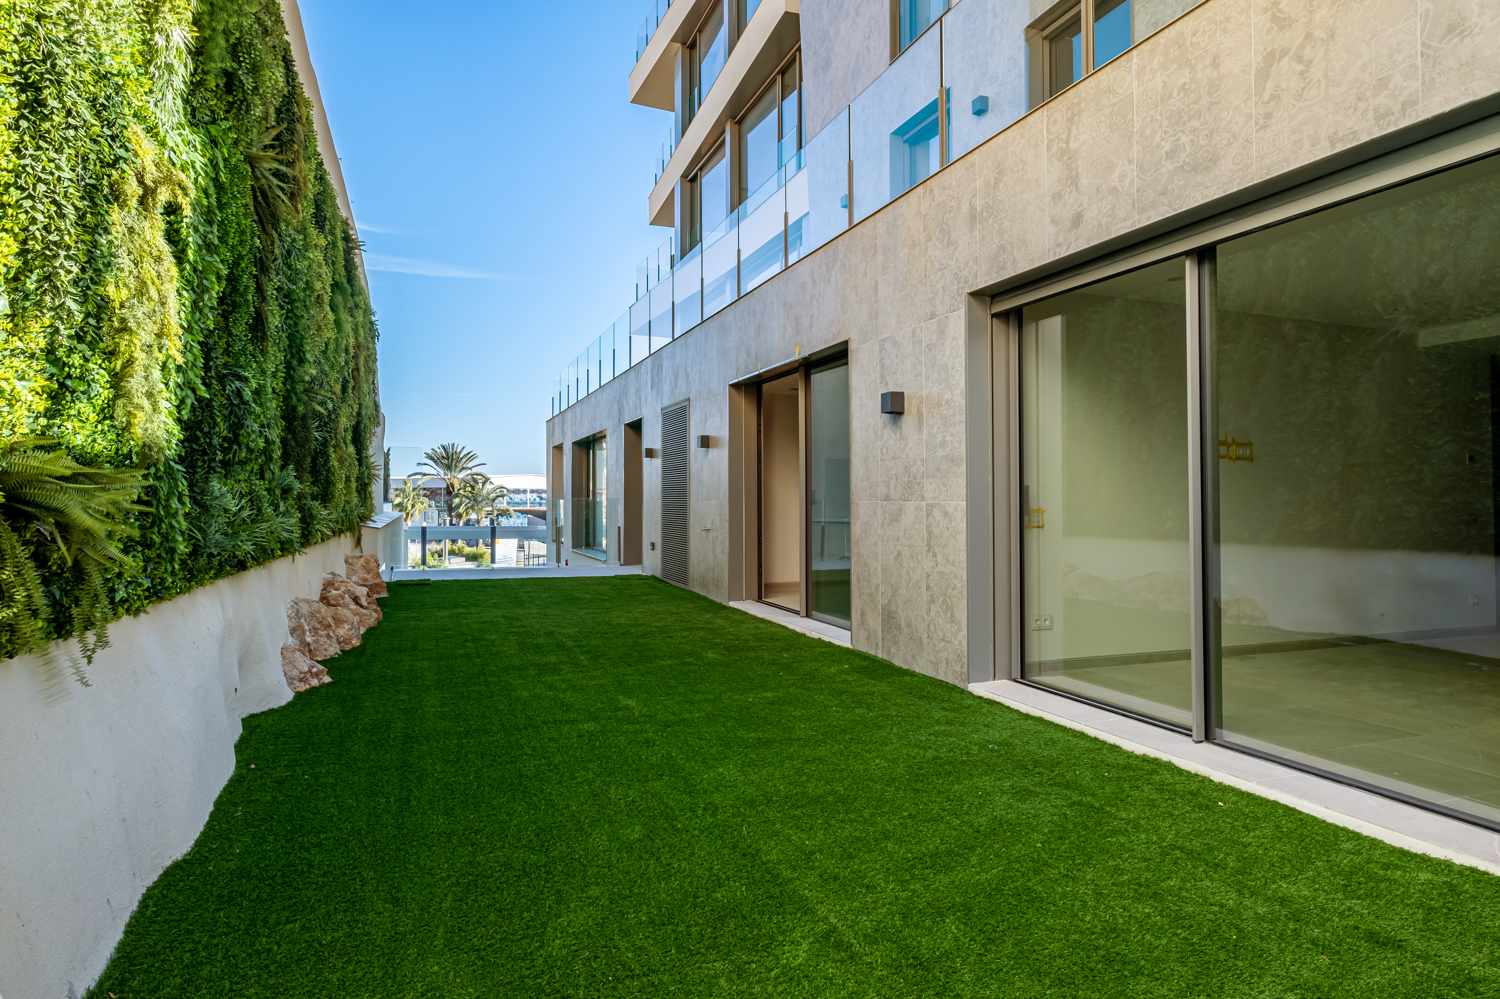 NEW LUXURY DEVELOPMENT FIRST LINE WITH TERRACE AND GARDEN IN PALMA